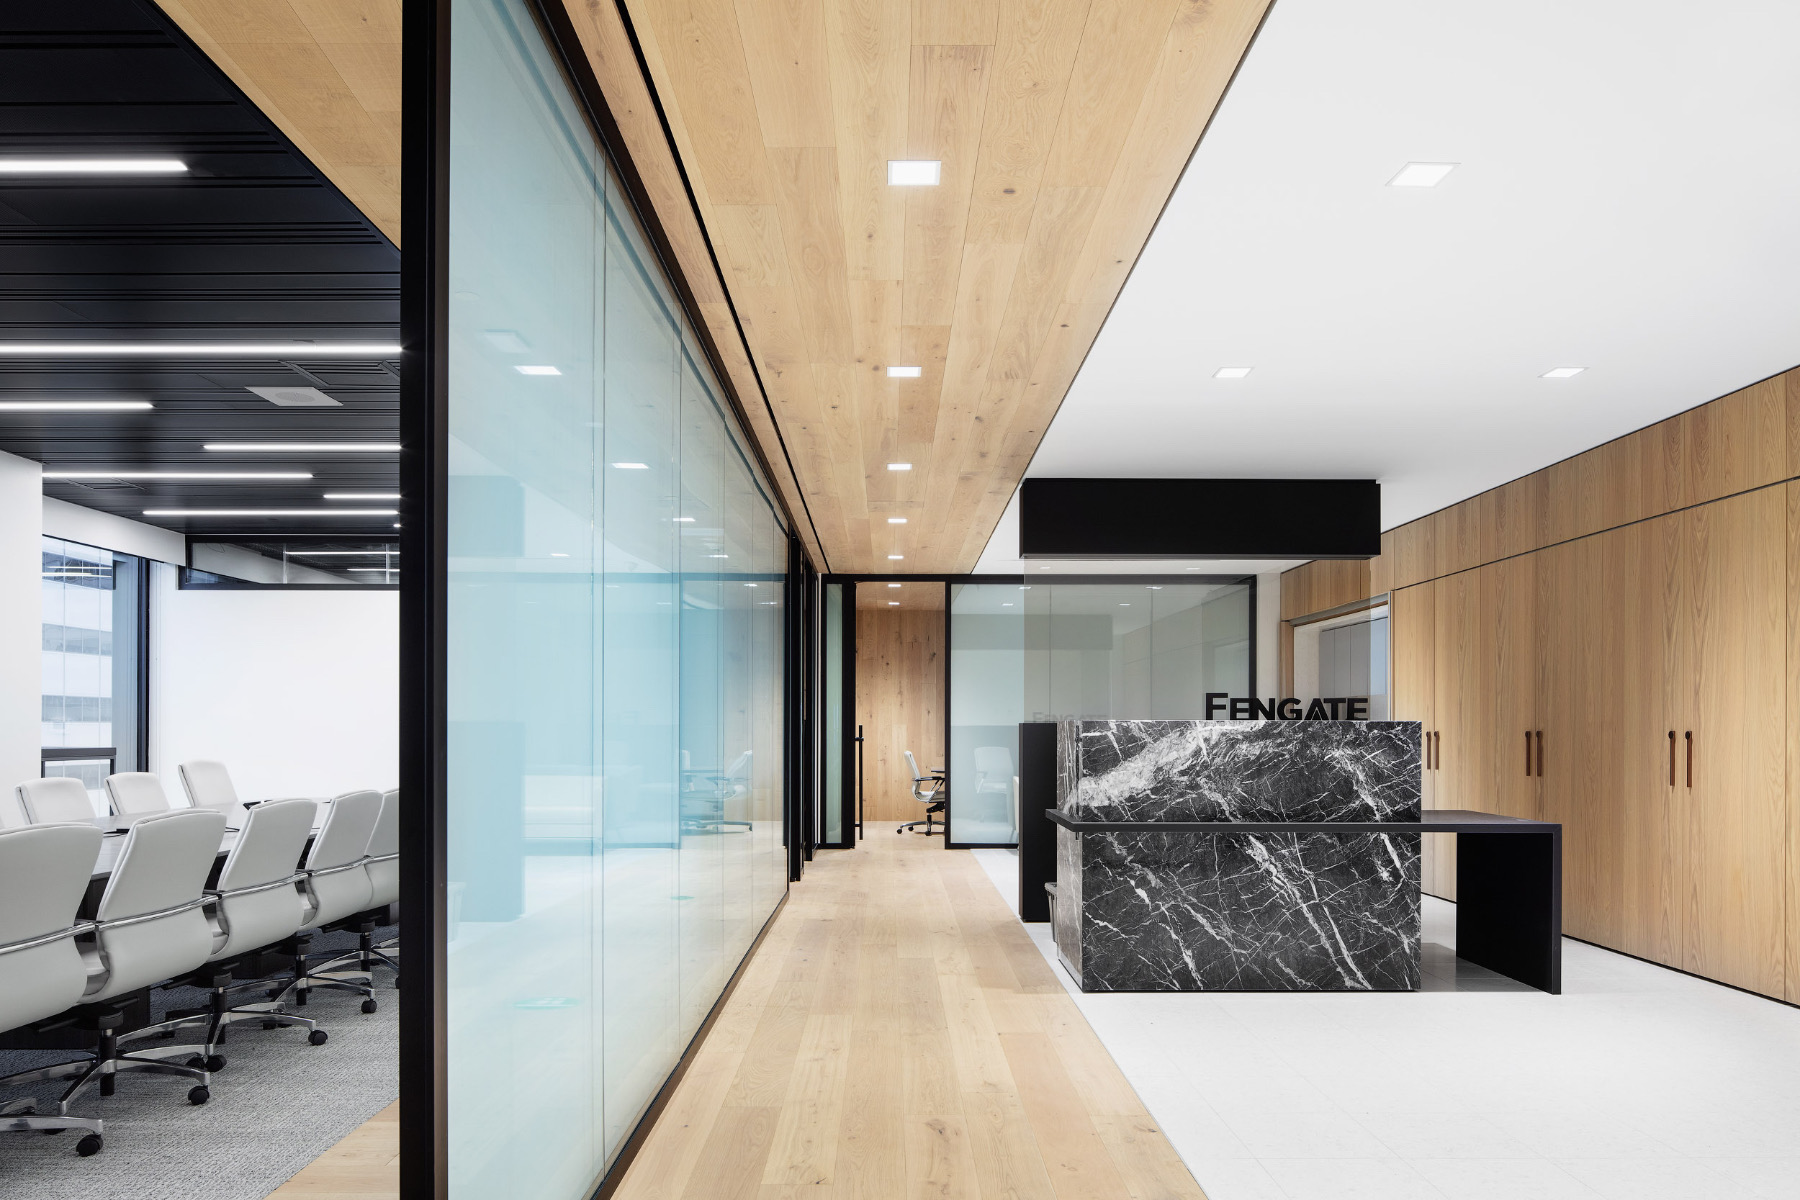 A Look Inside Fengate’s New Toronto Office